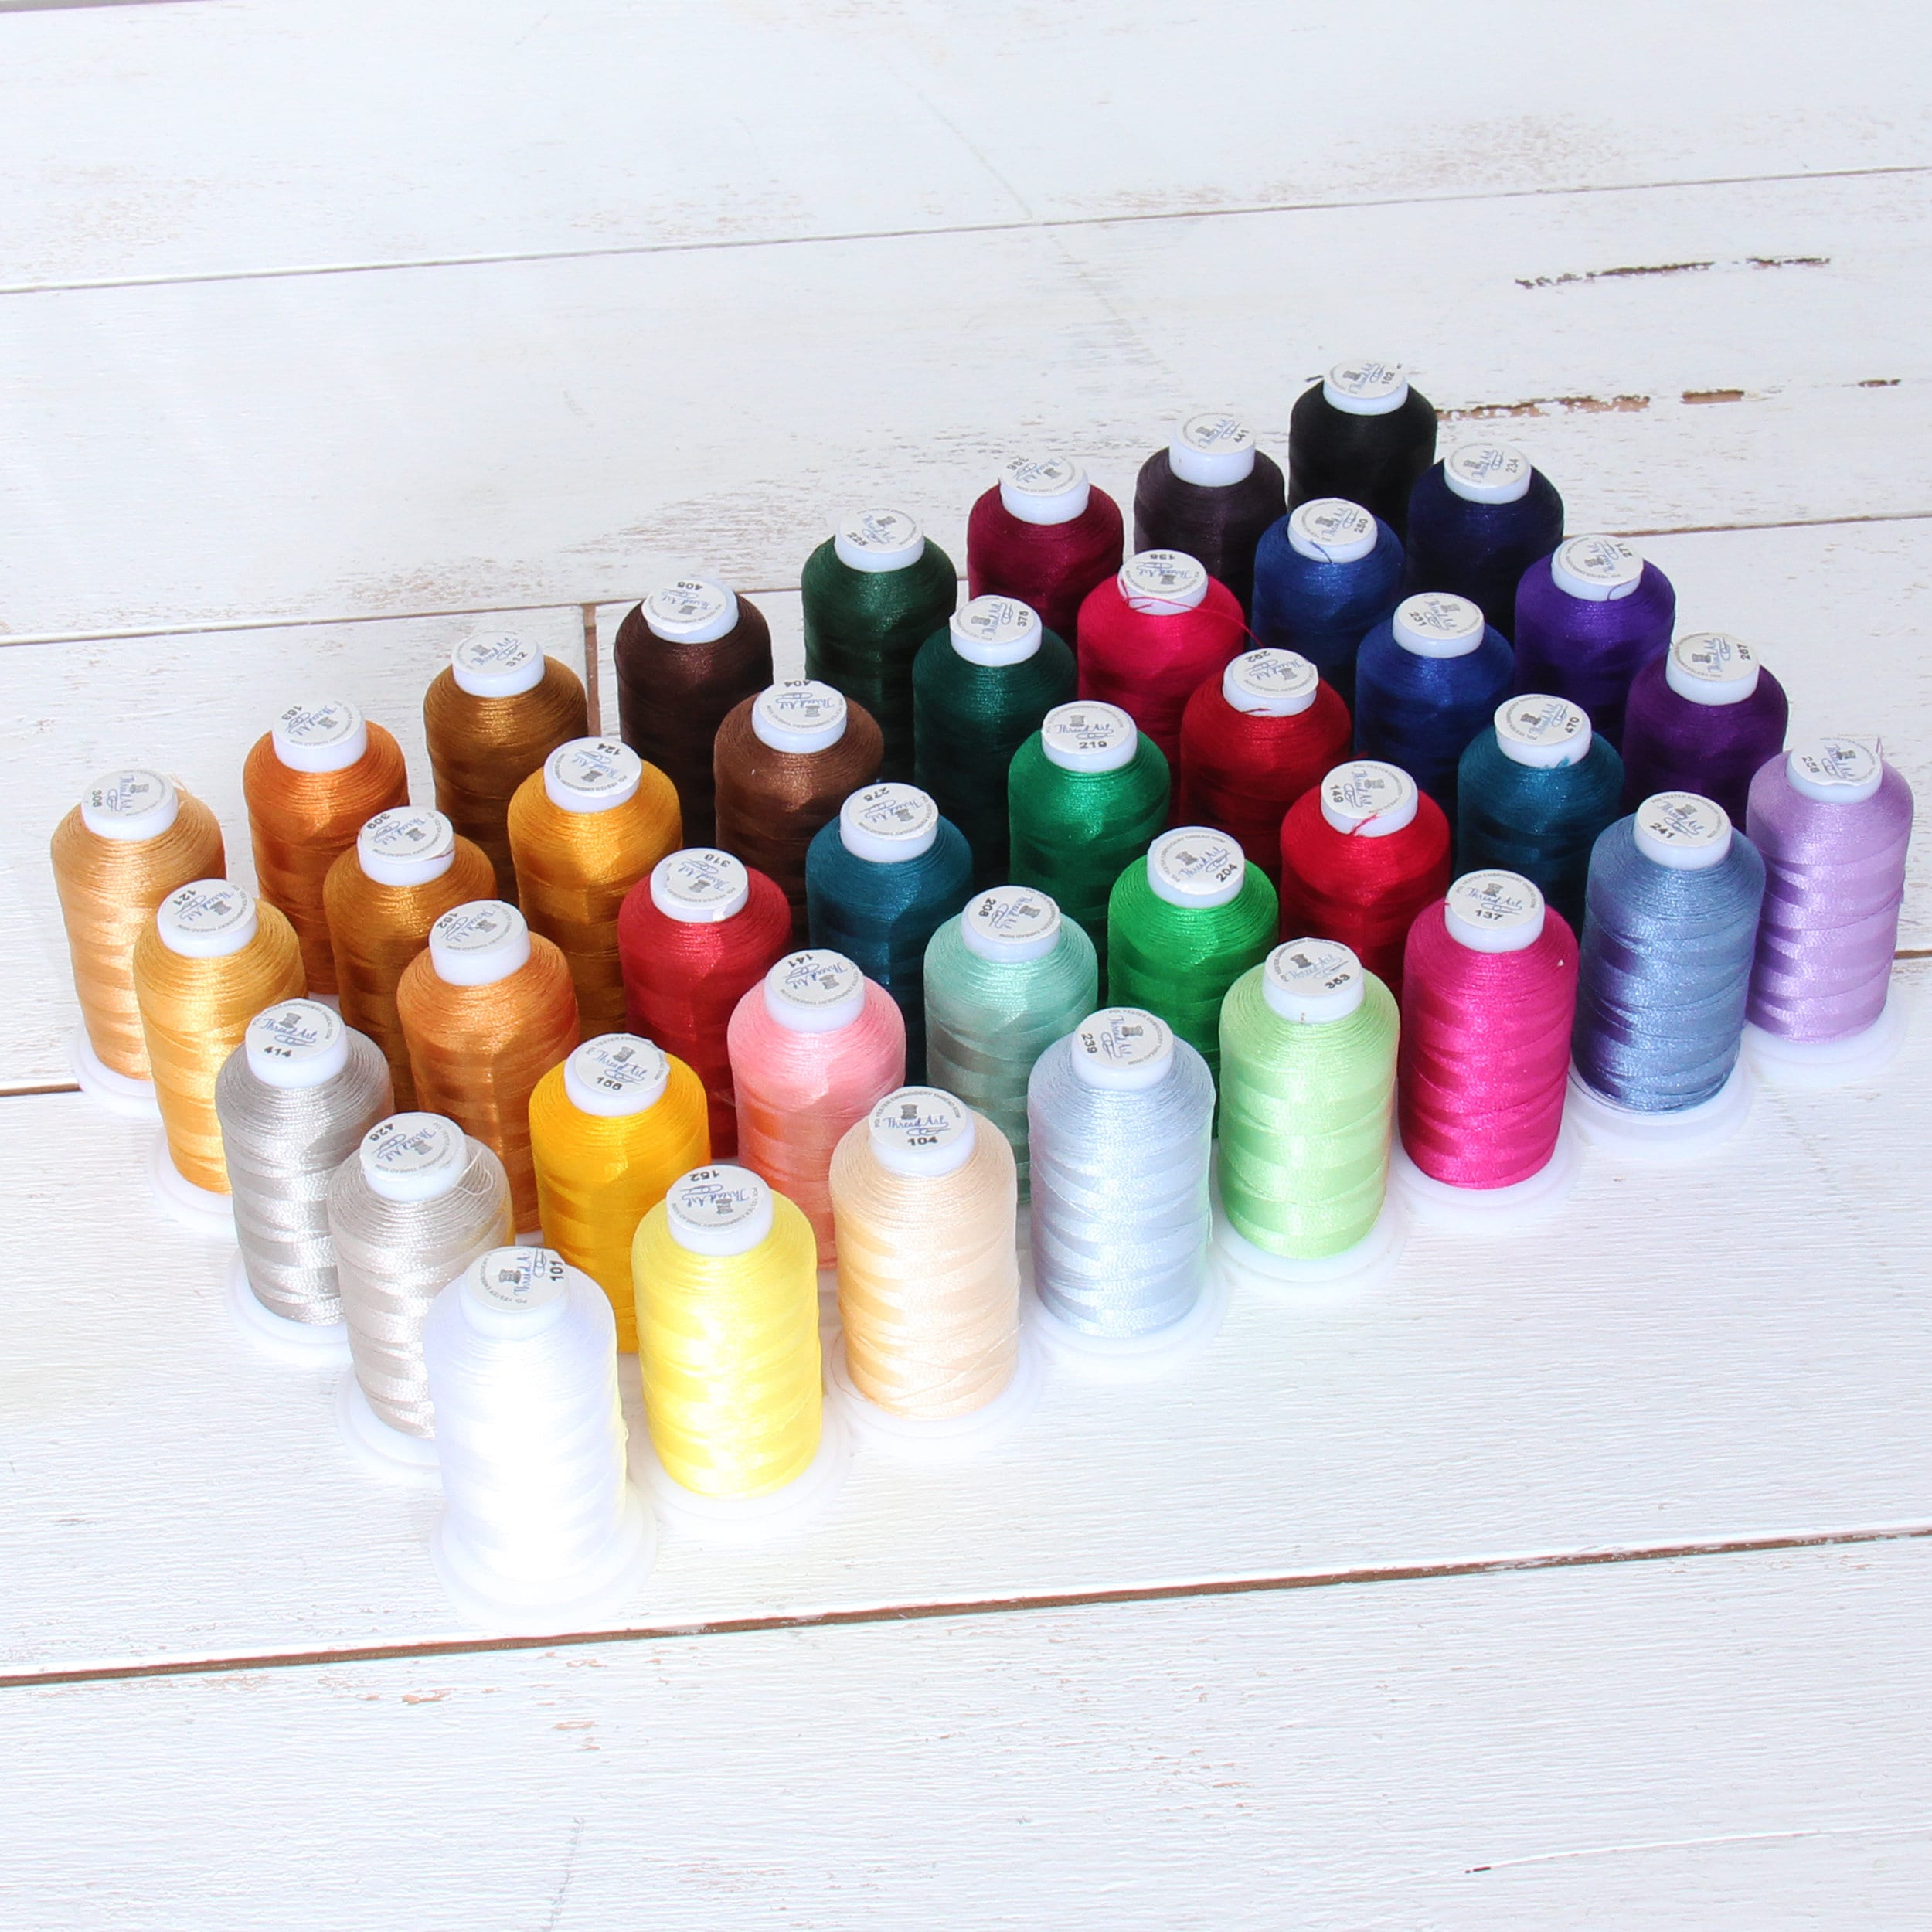 New brothread 9 Basic Colors Metallic Embroidery Machine Thread Kit 500M (550Y) Each Spool for Computerized Embroidery and Decorative Sewing